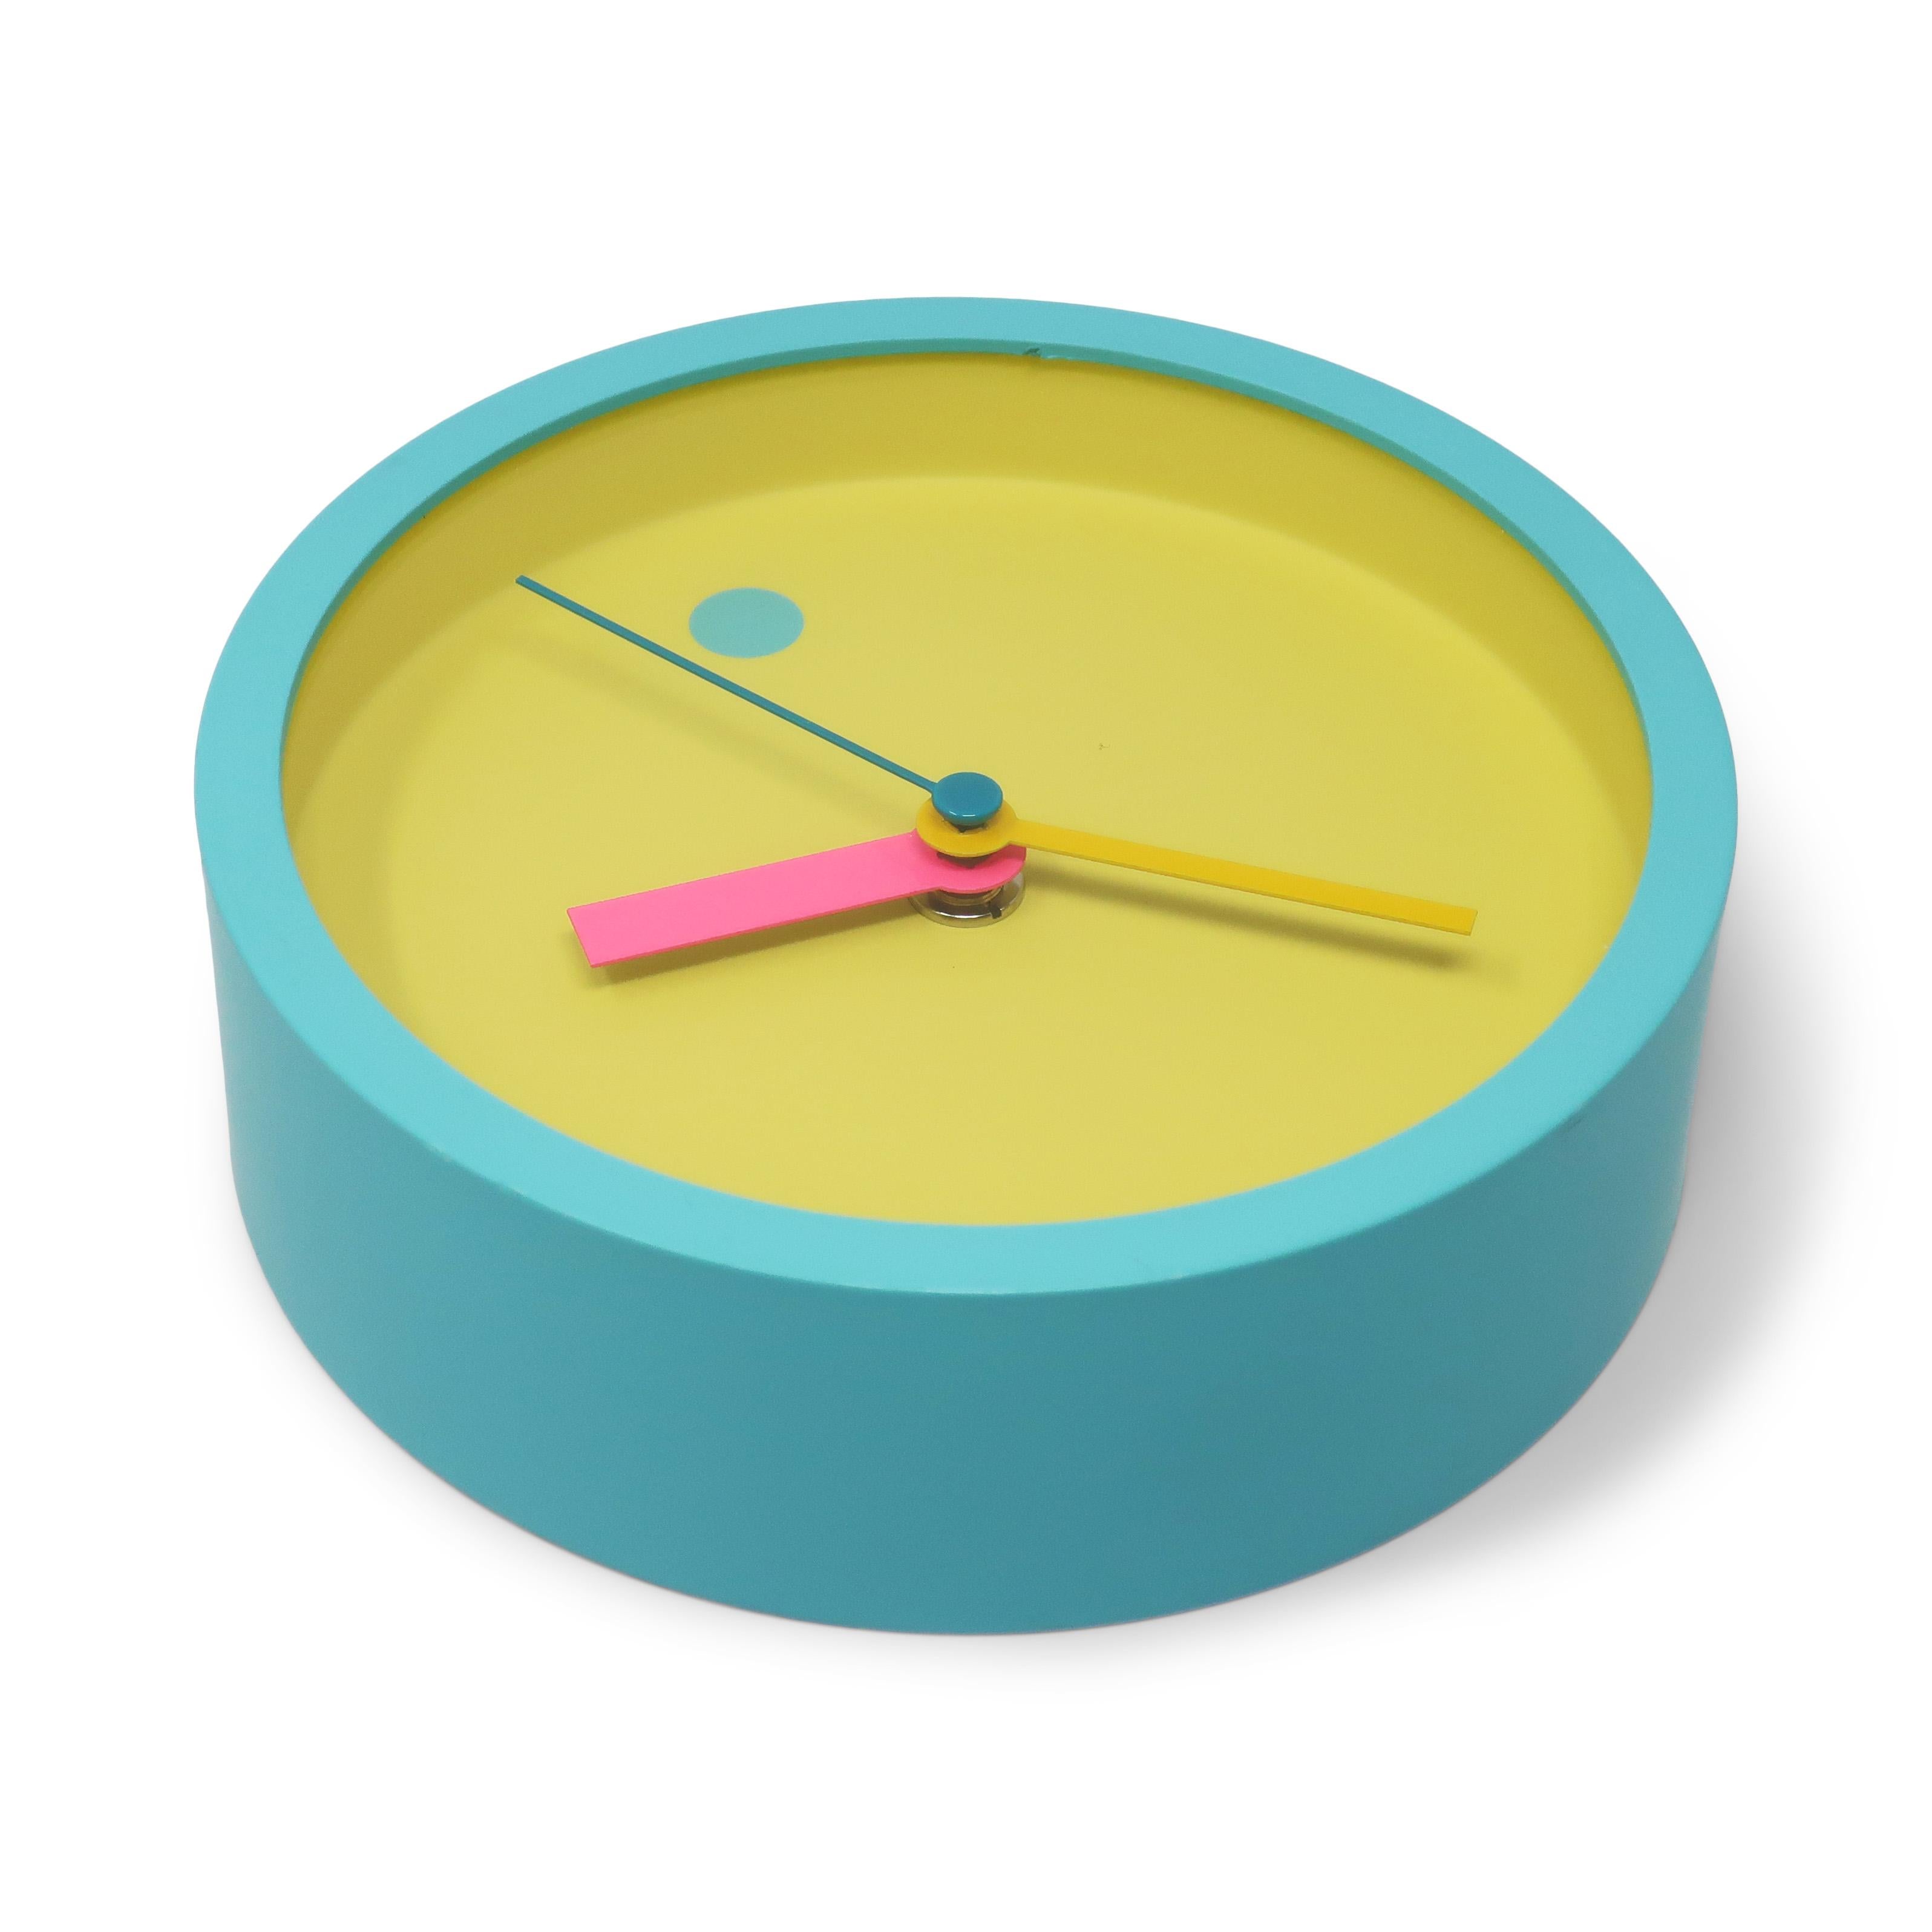 A perfectly elegant and sophisticated 1980s wall clock designed by Shohei Mihara for Wakita. Postmodern, Memphis Group-influenced design at its finest!  Pastel colored with light blue frame, yellow face, pink and green accents. Battery operated and